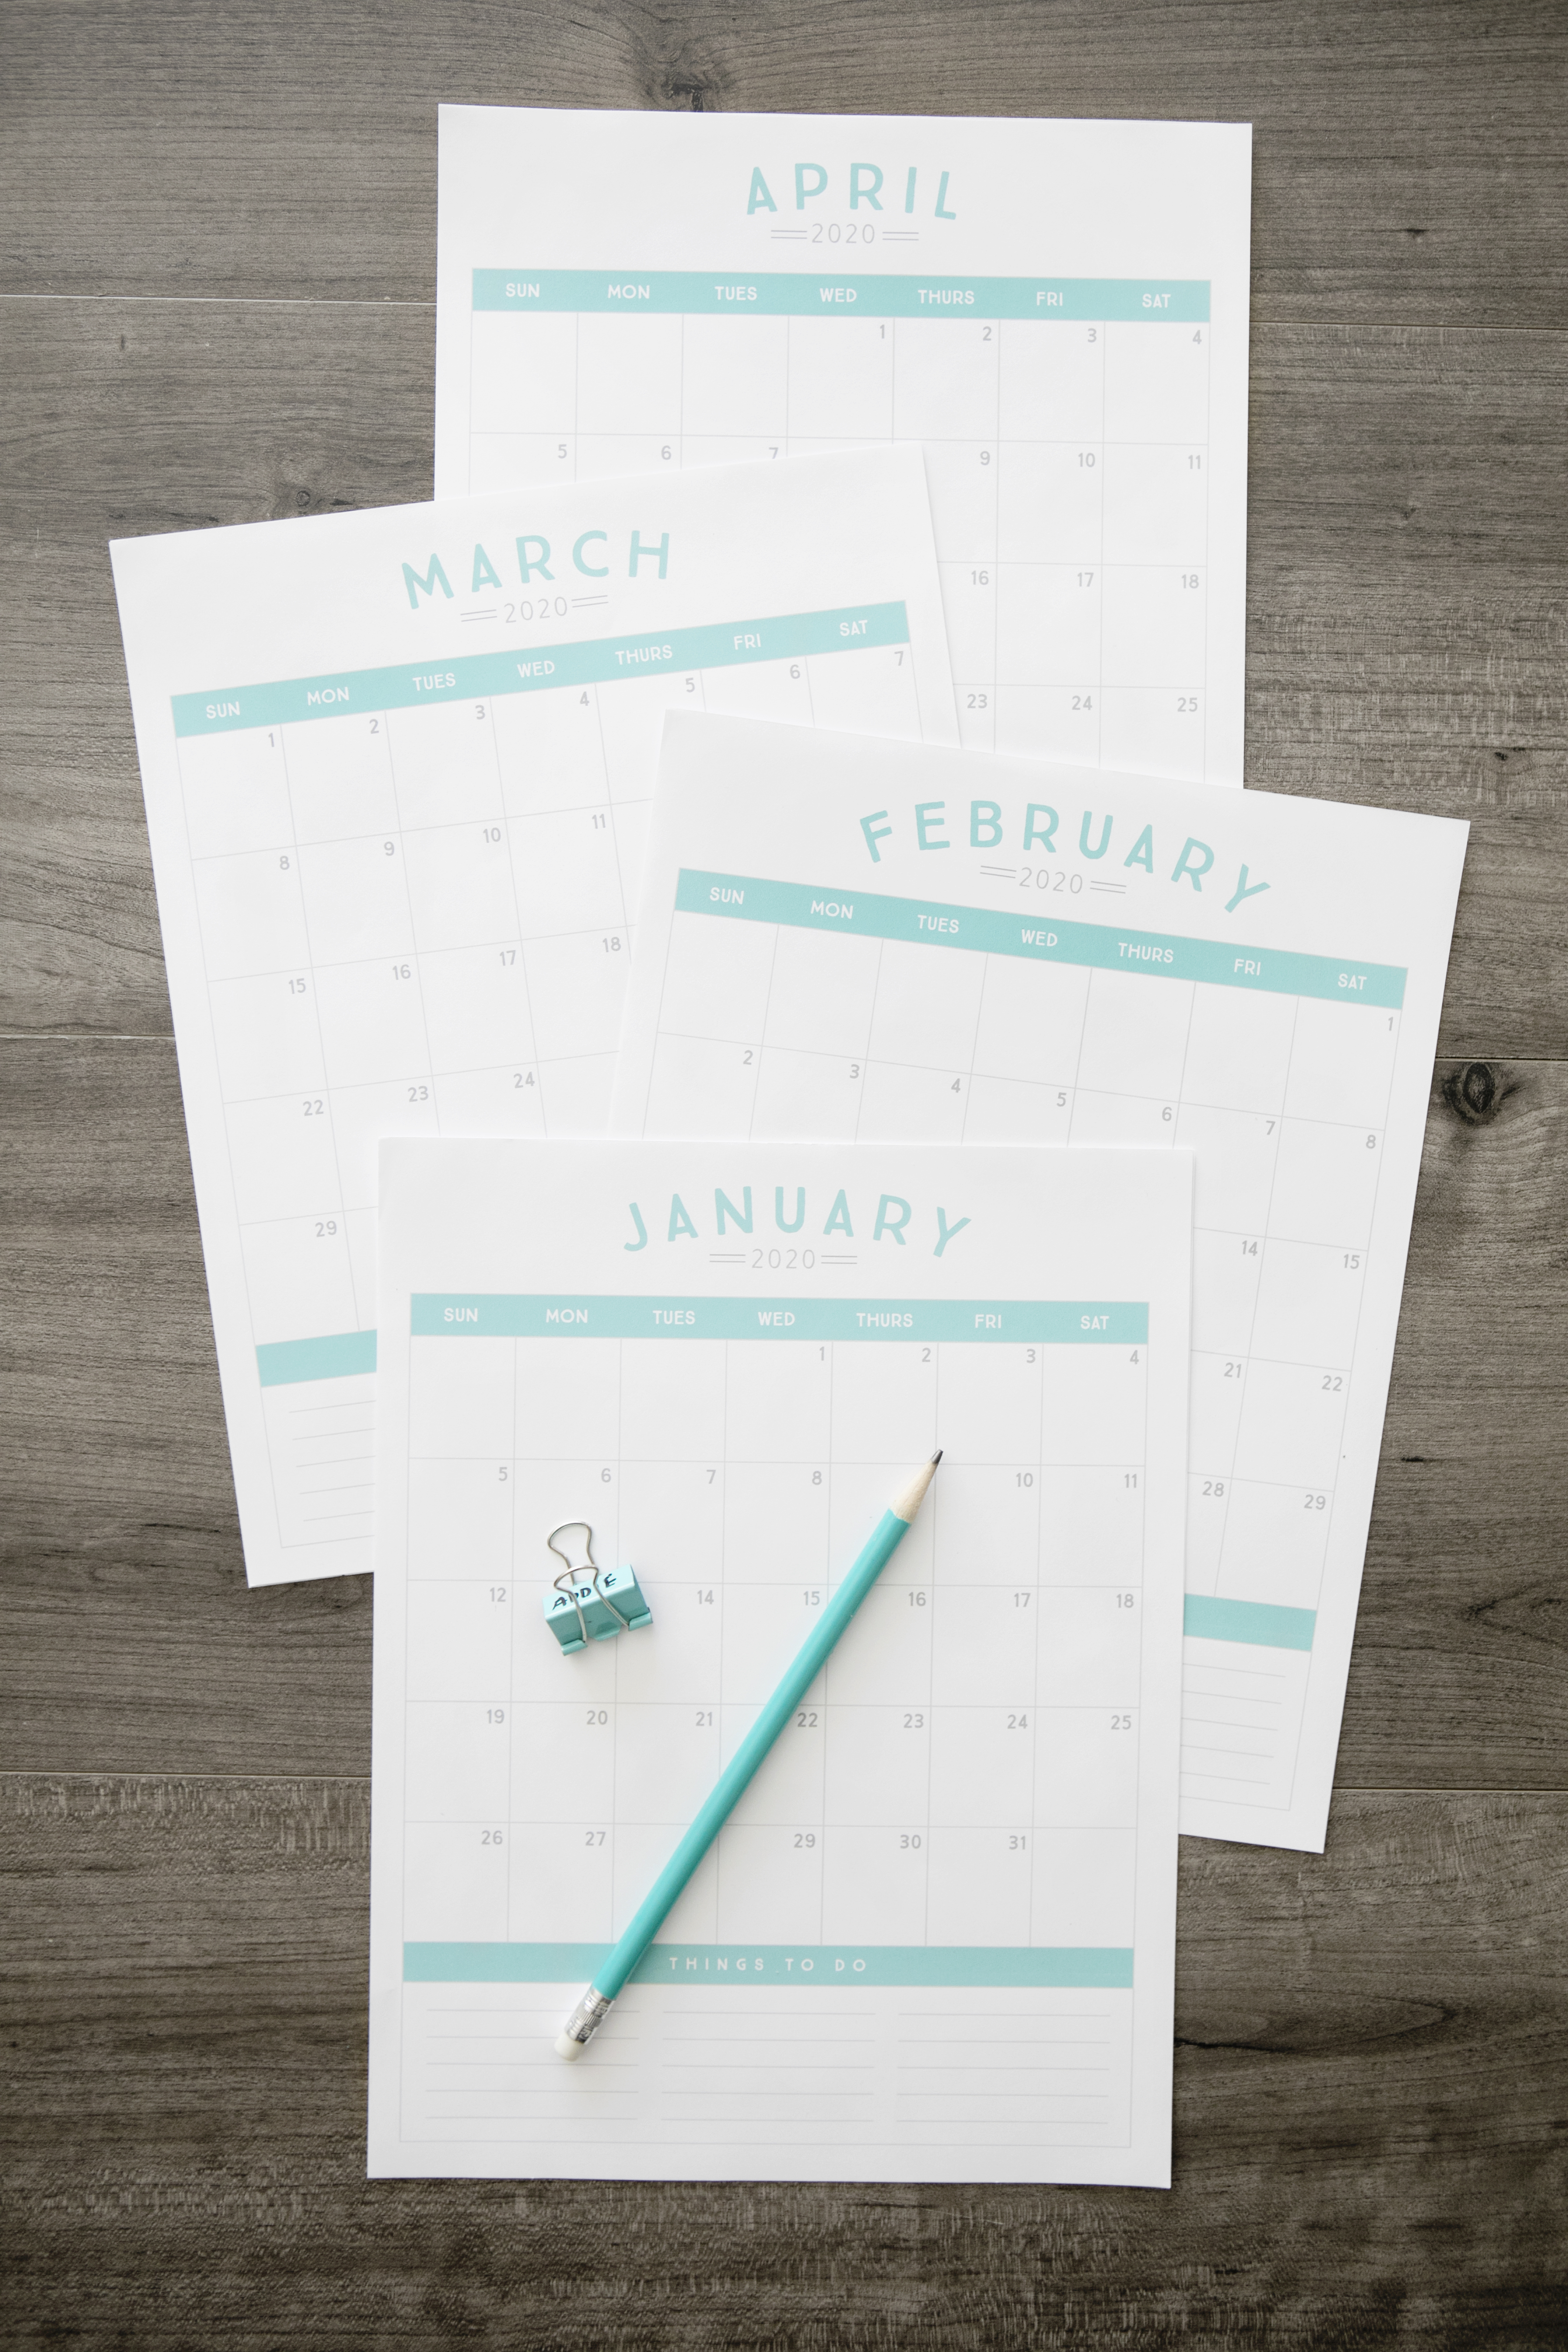 Get organized in the new year with a brand new 2020 printable calendar!